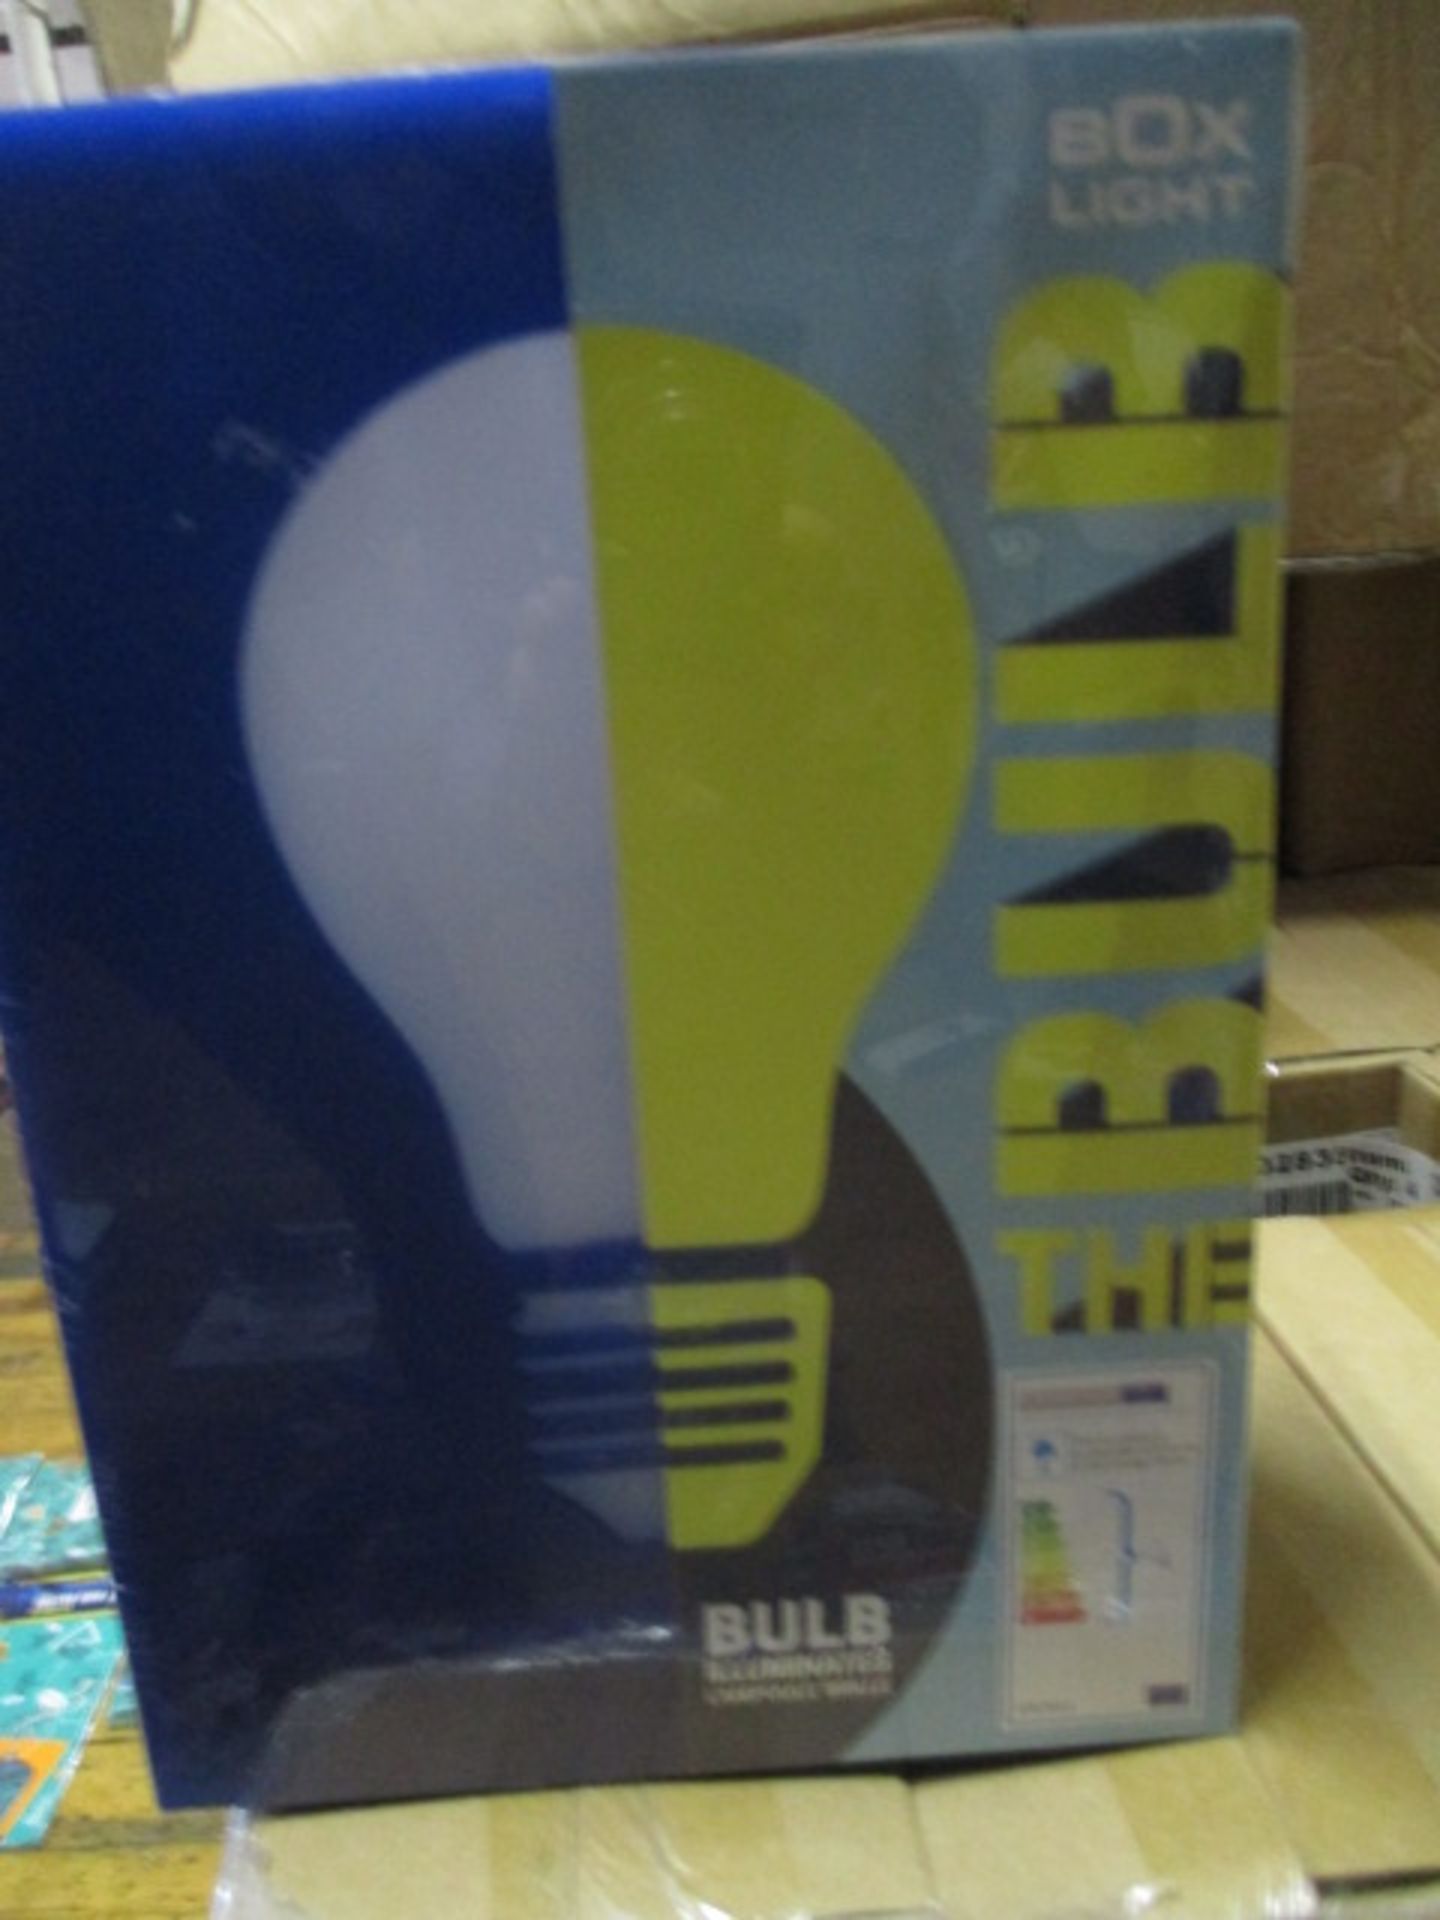 Brand new The Bulb Styled Box light - new and boxed